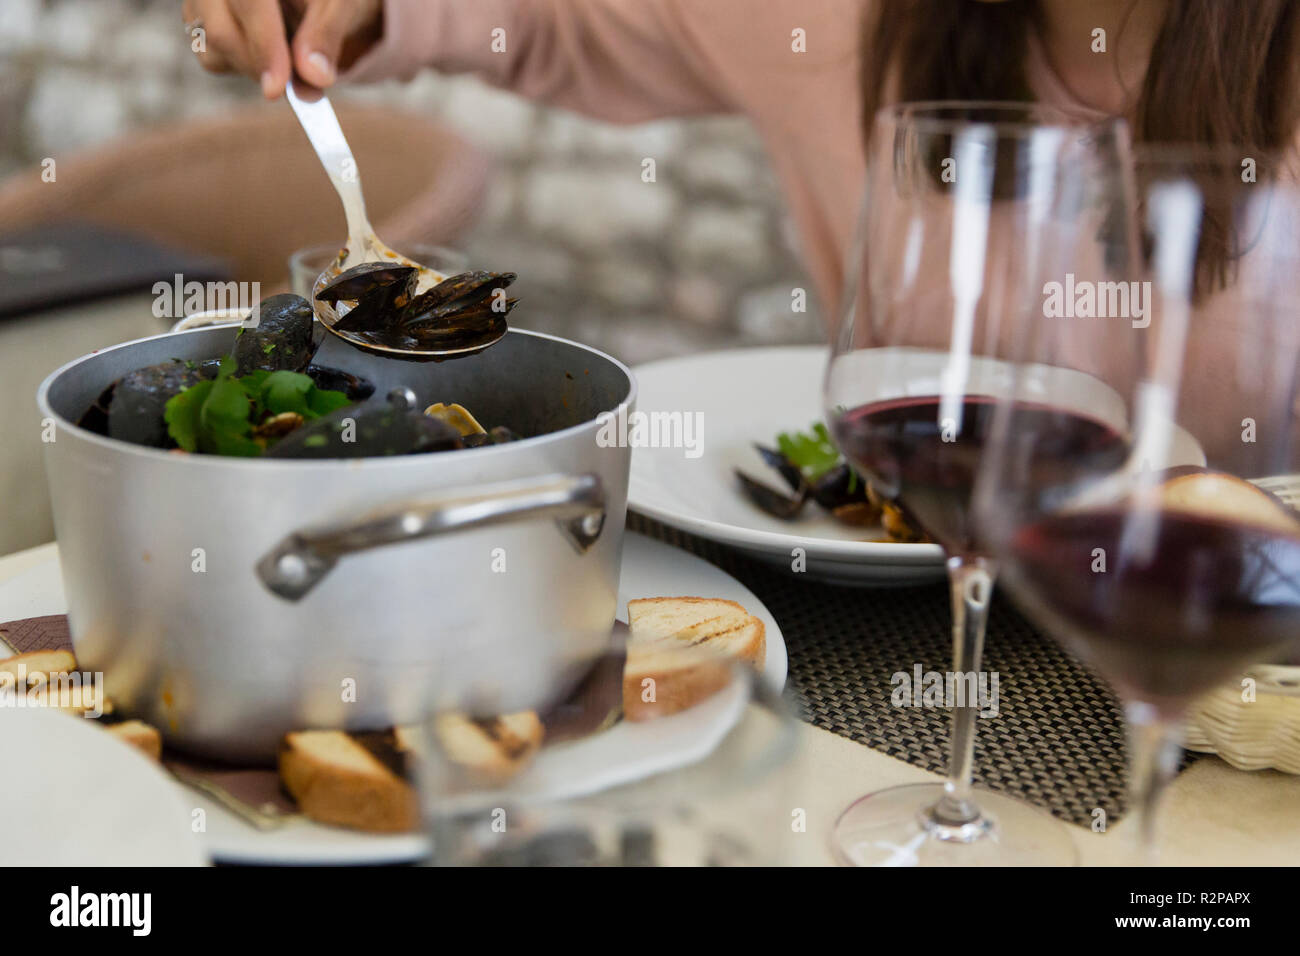 Silver pot full of cooked mussels, woman helps herself, spoon, red wine and white bread on the table Stock Photo